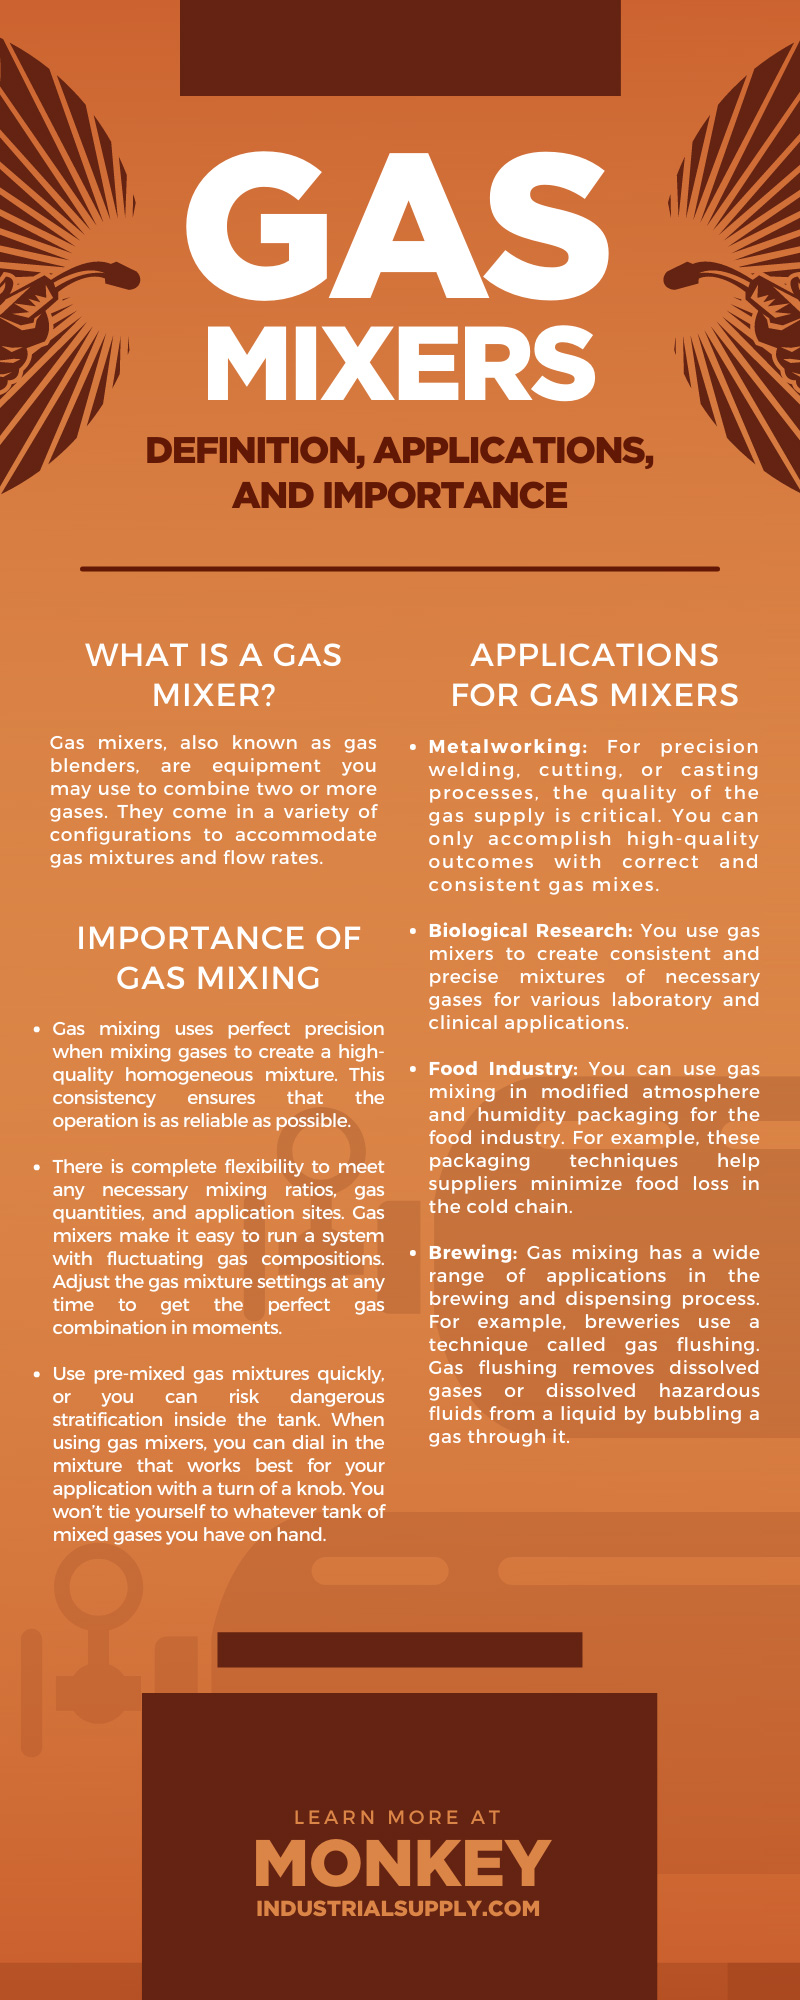 Gas Mixers: Definition, Applications, and Importance